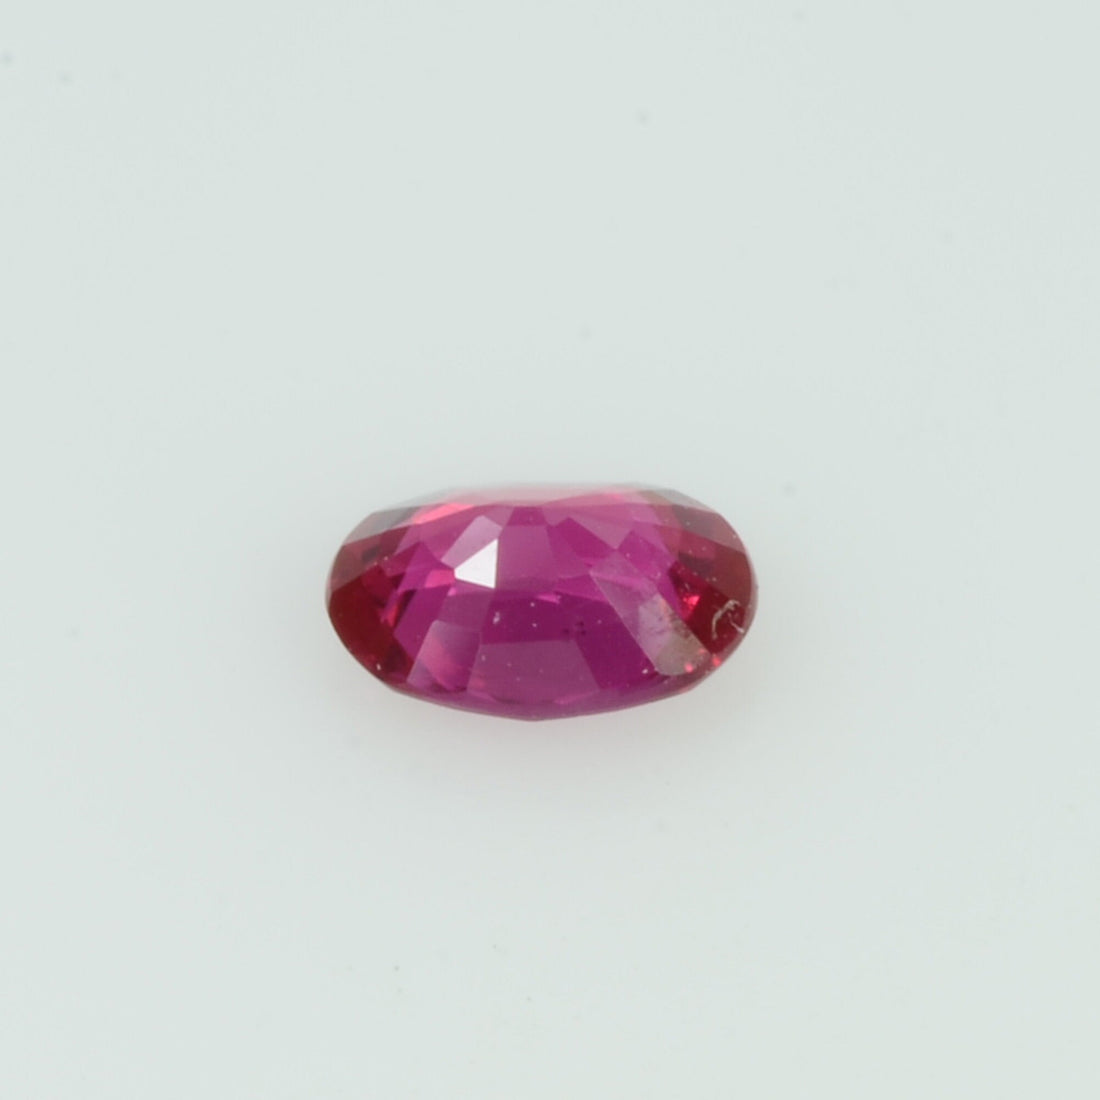 0.31 Cts Natural Vietnam Ruby Loose Gemstone Oval Cut